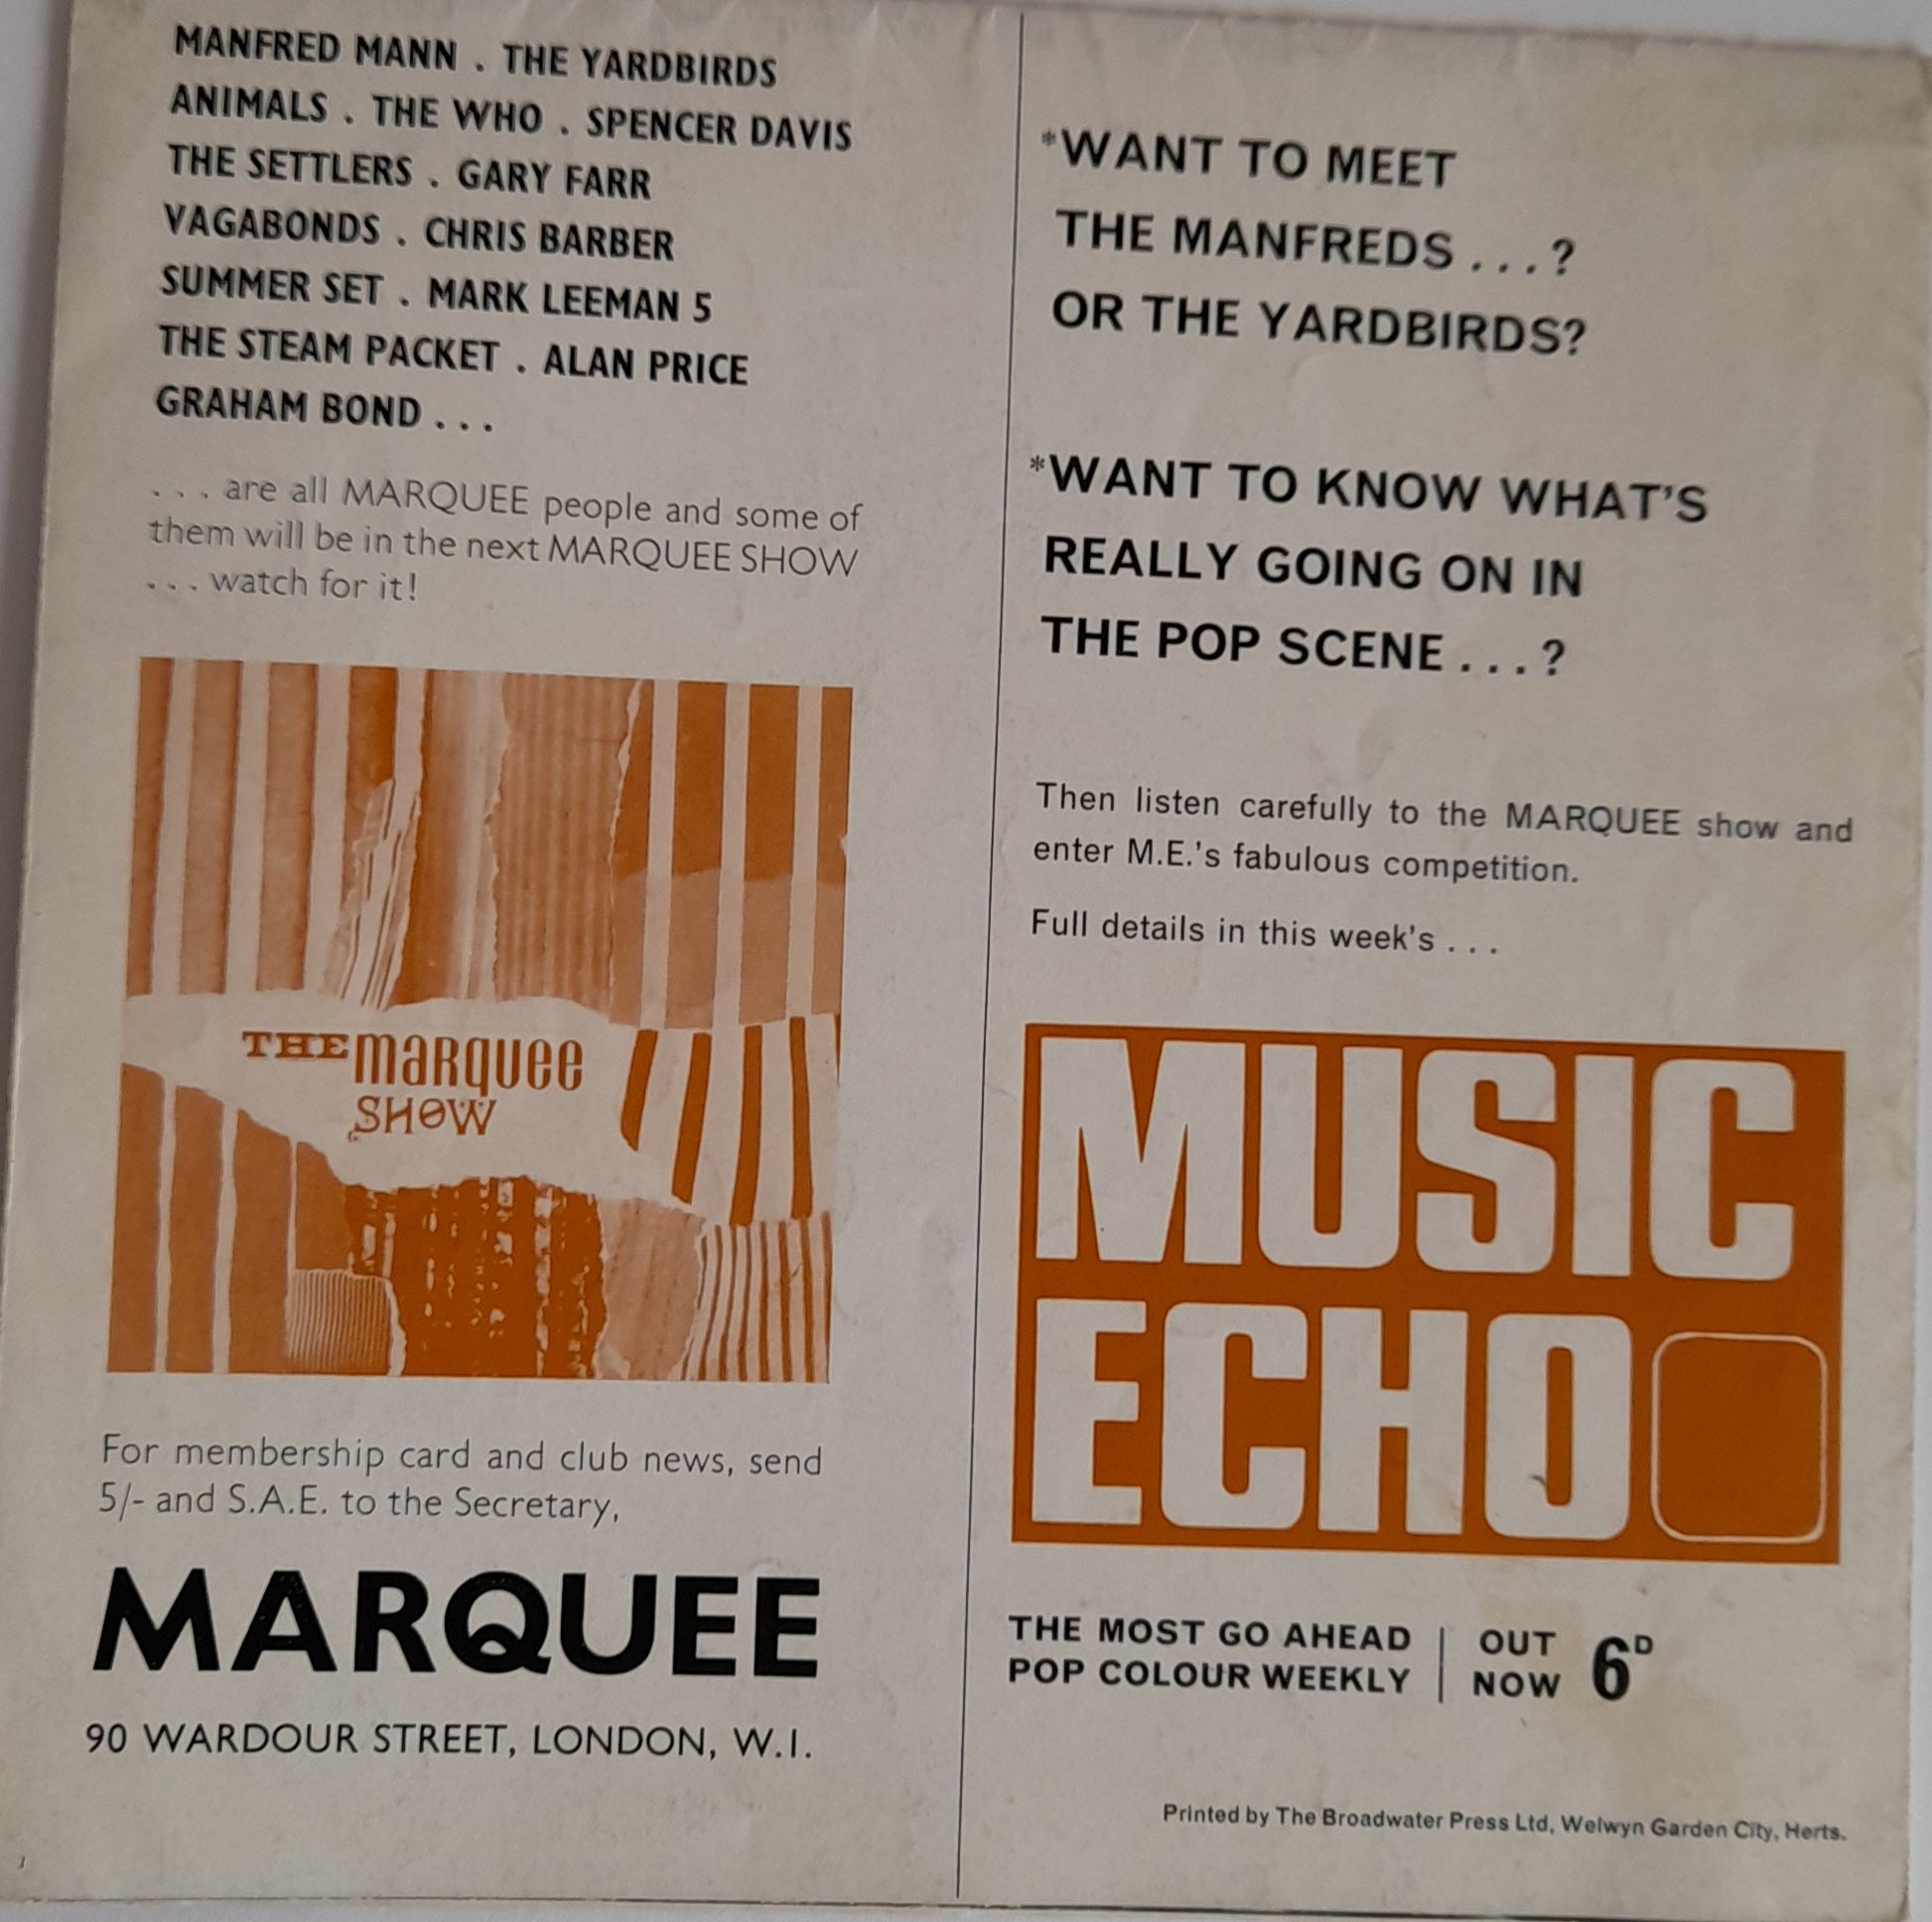 The Marquee Show 1960's Concert Programme Poster - Manfred Mann, Yardbirds, The Who, Animals + More